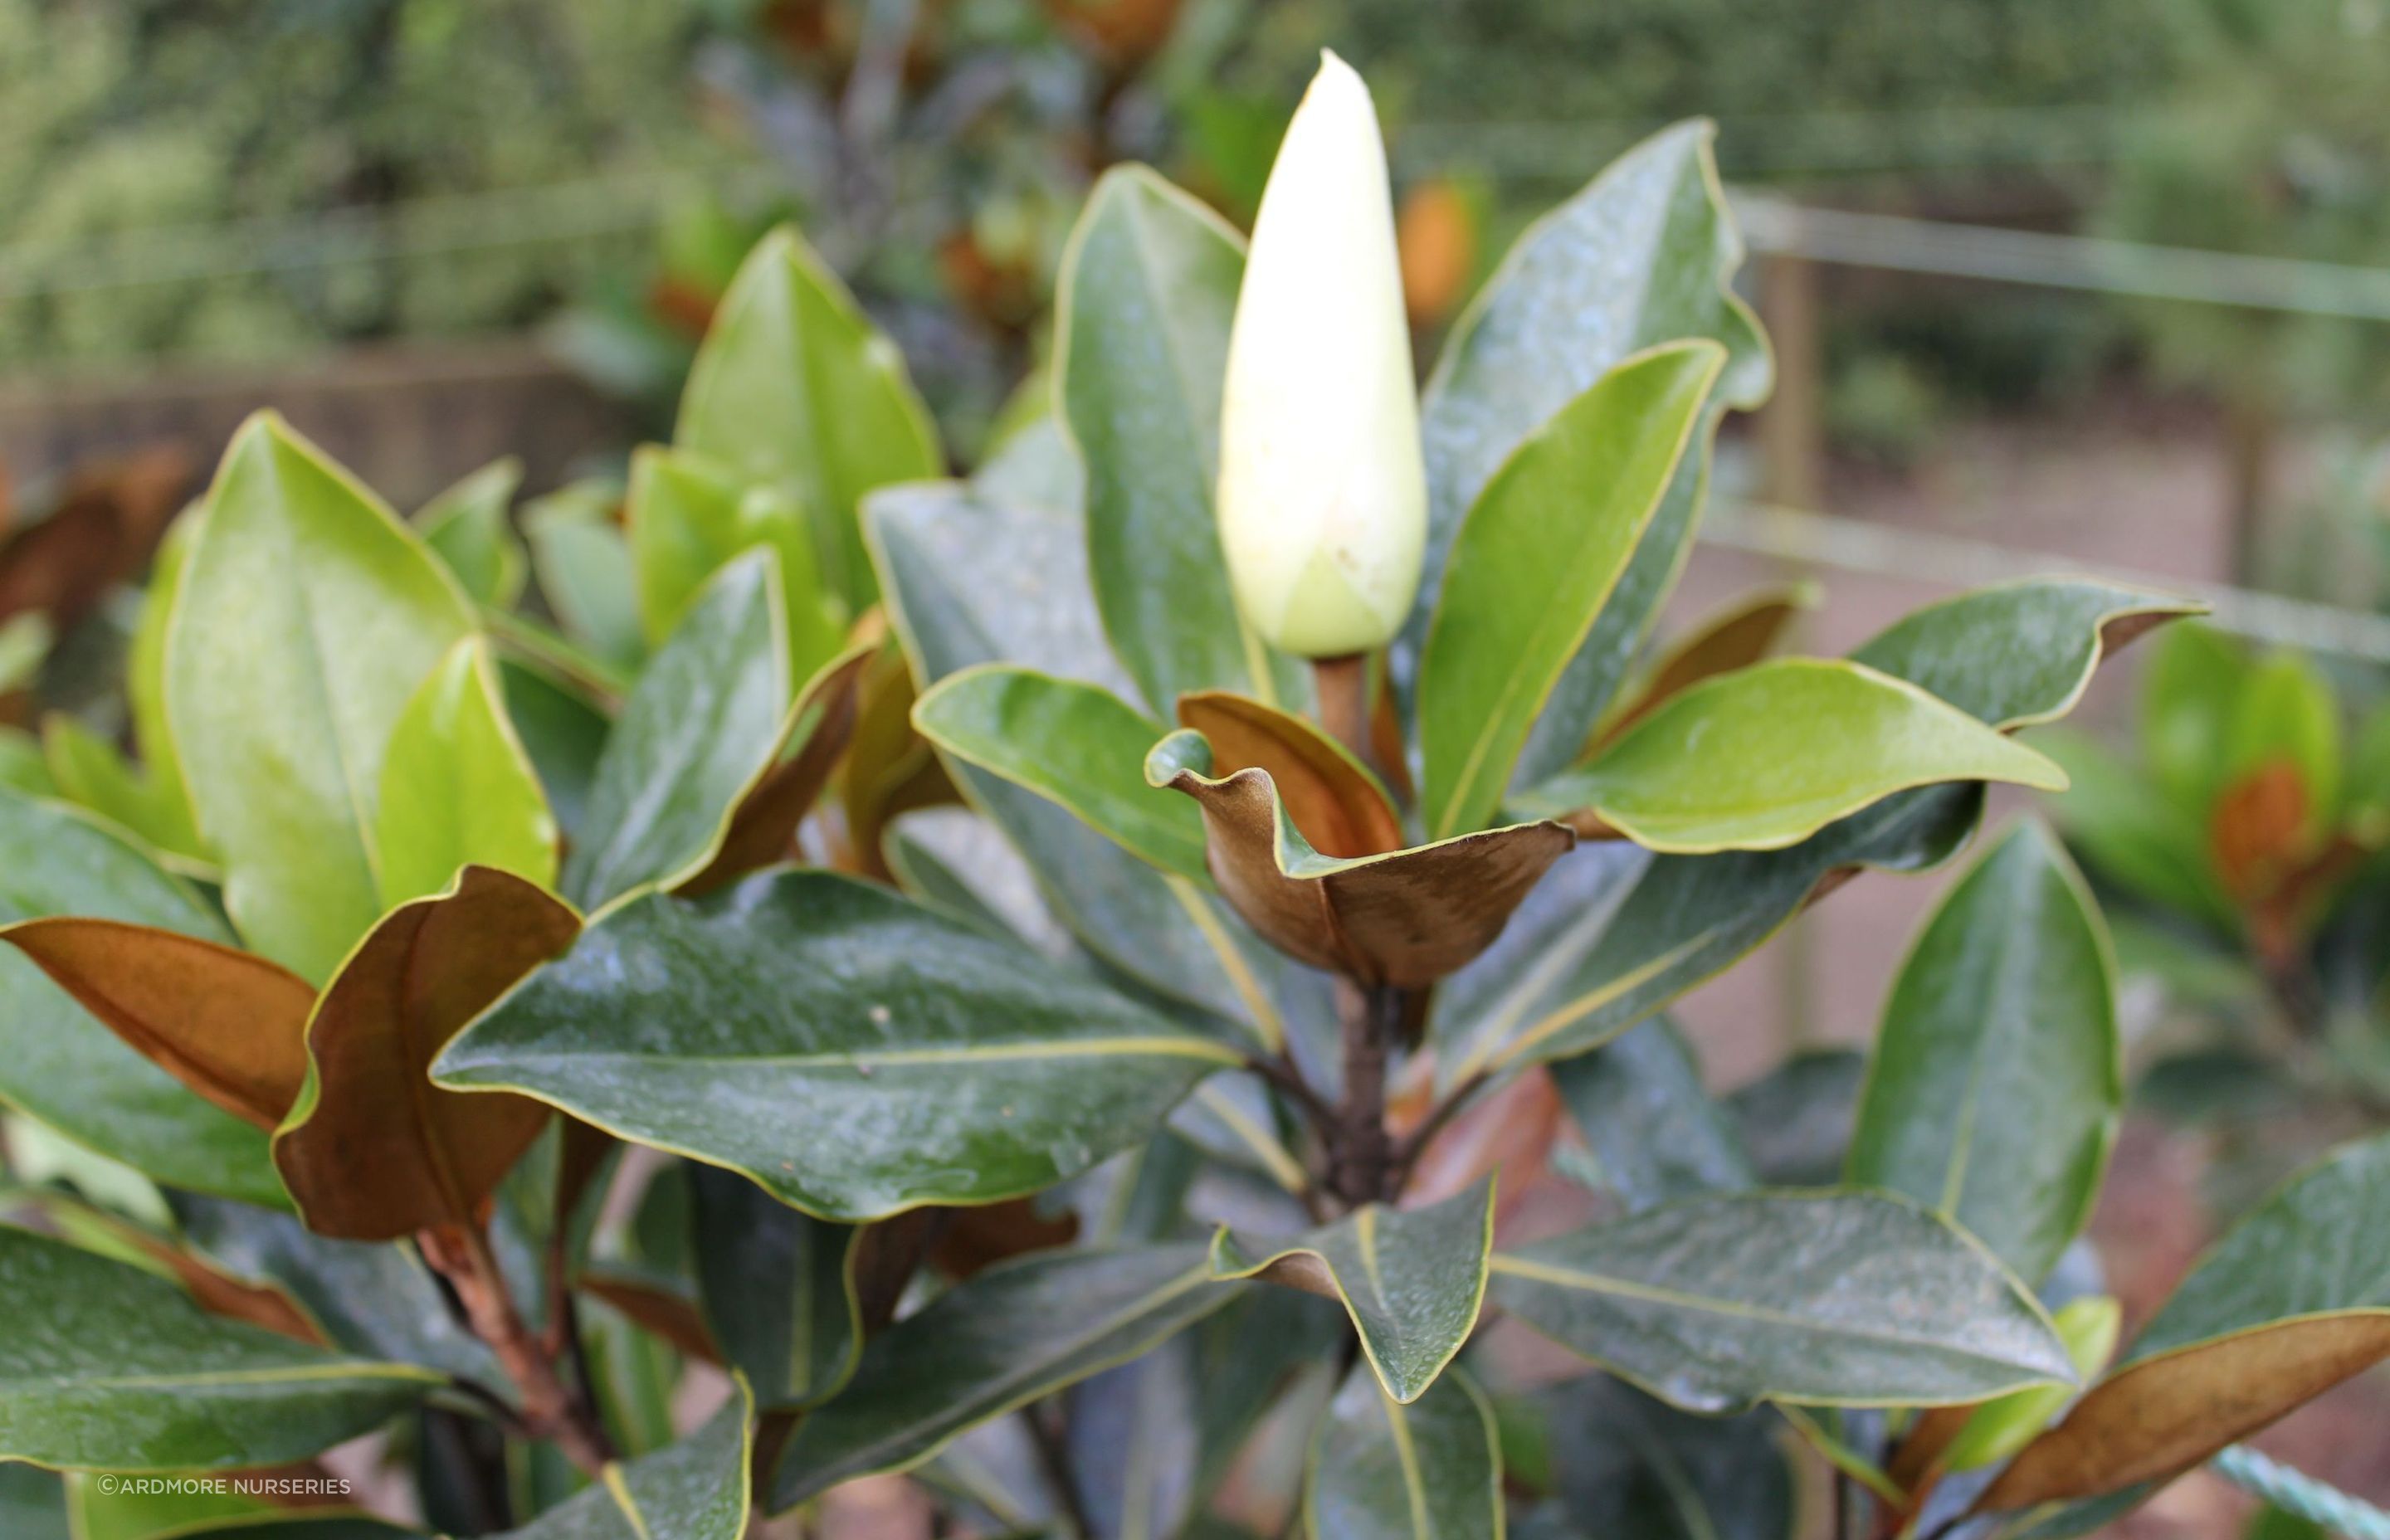 The Magnolia Grandiflora 'Little Gem' is a slow growing, upright small tree that provides visual interest, enhancing a space.